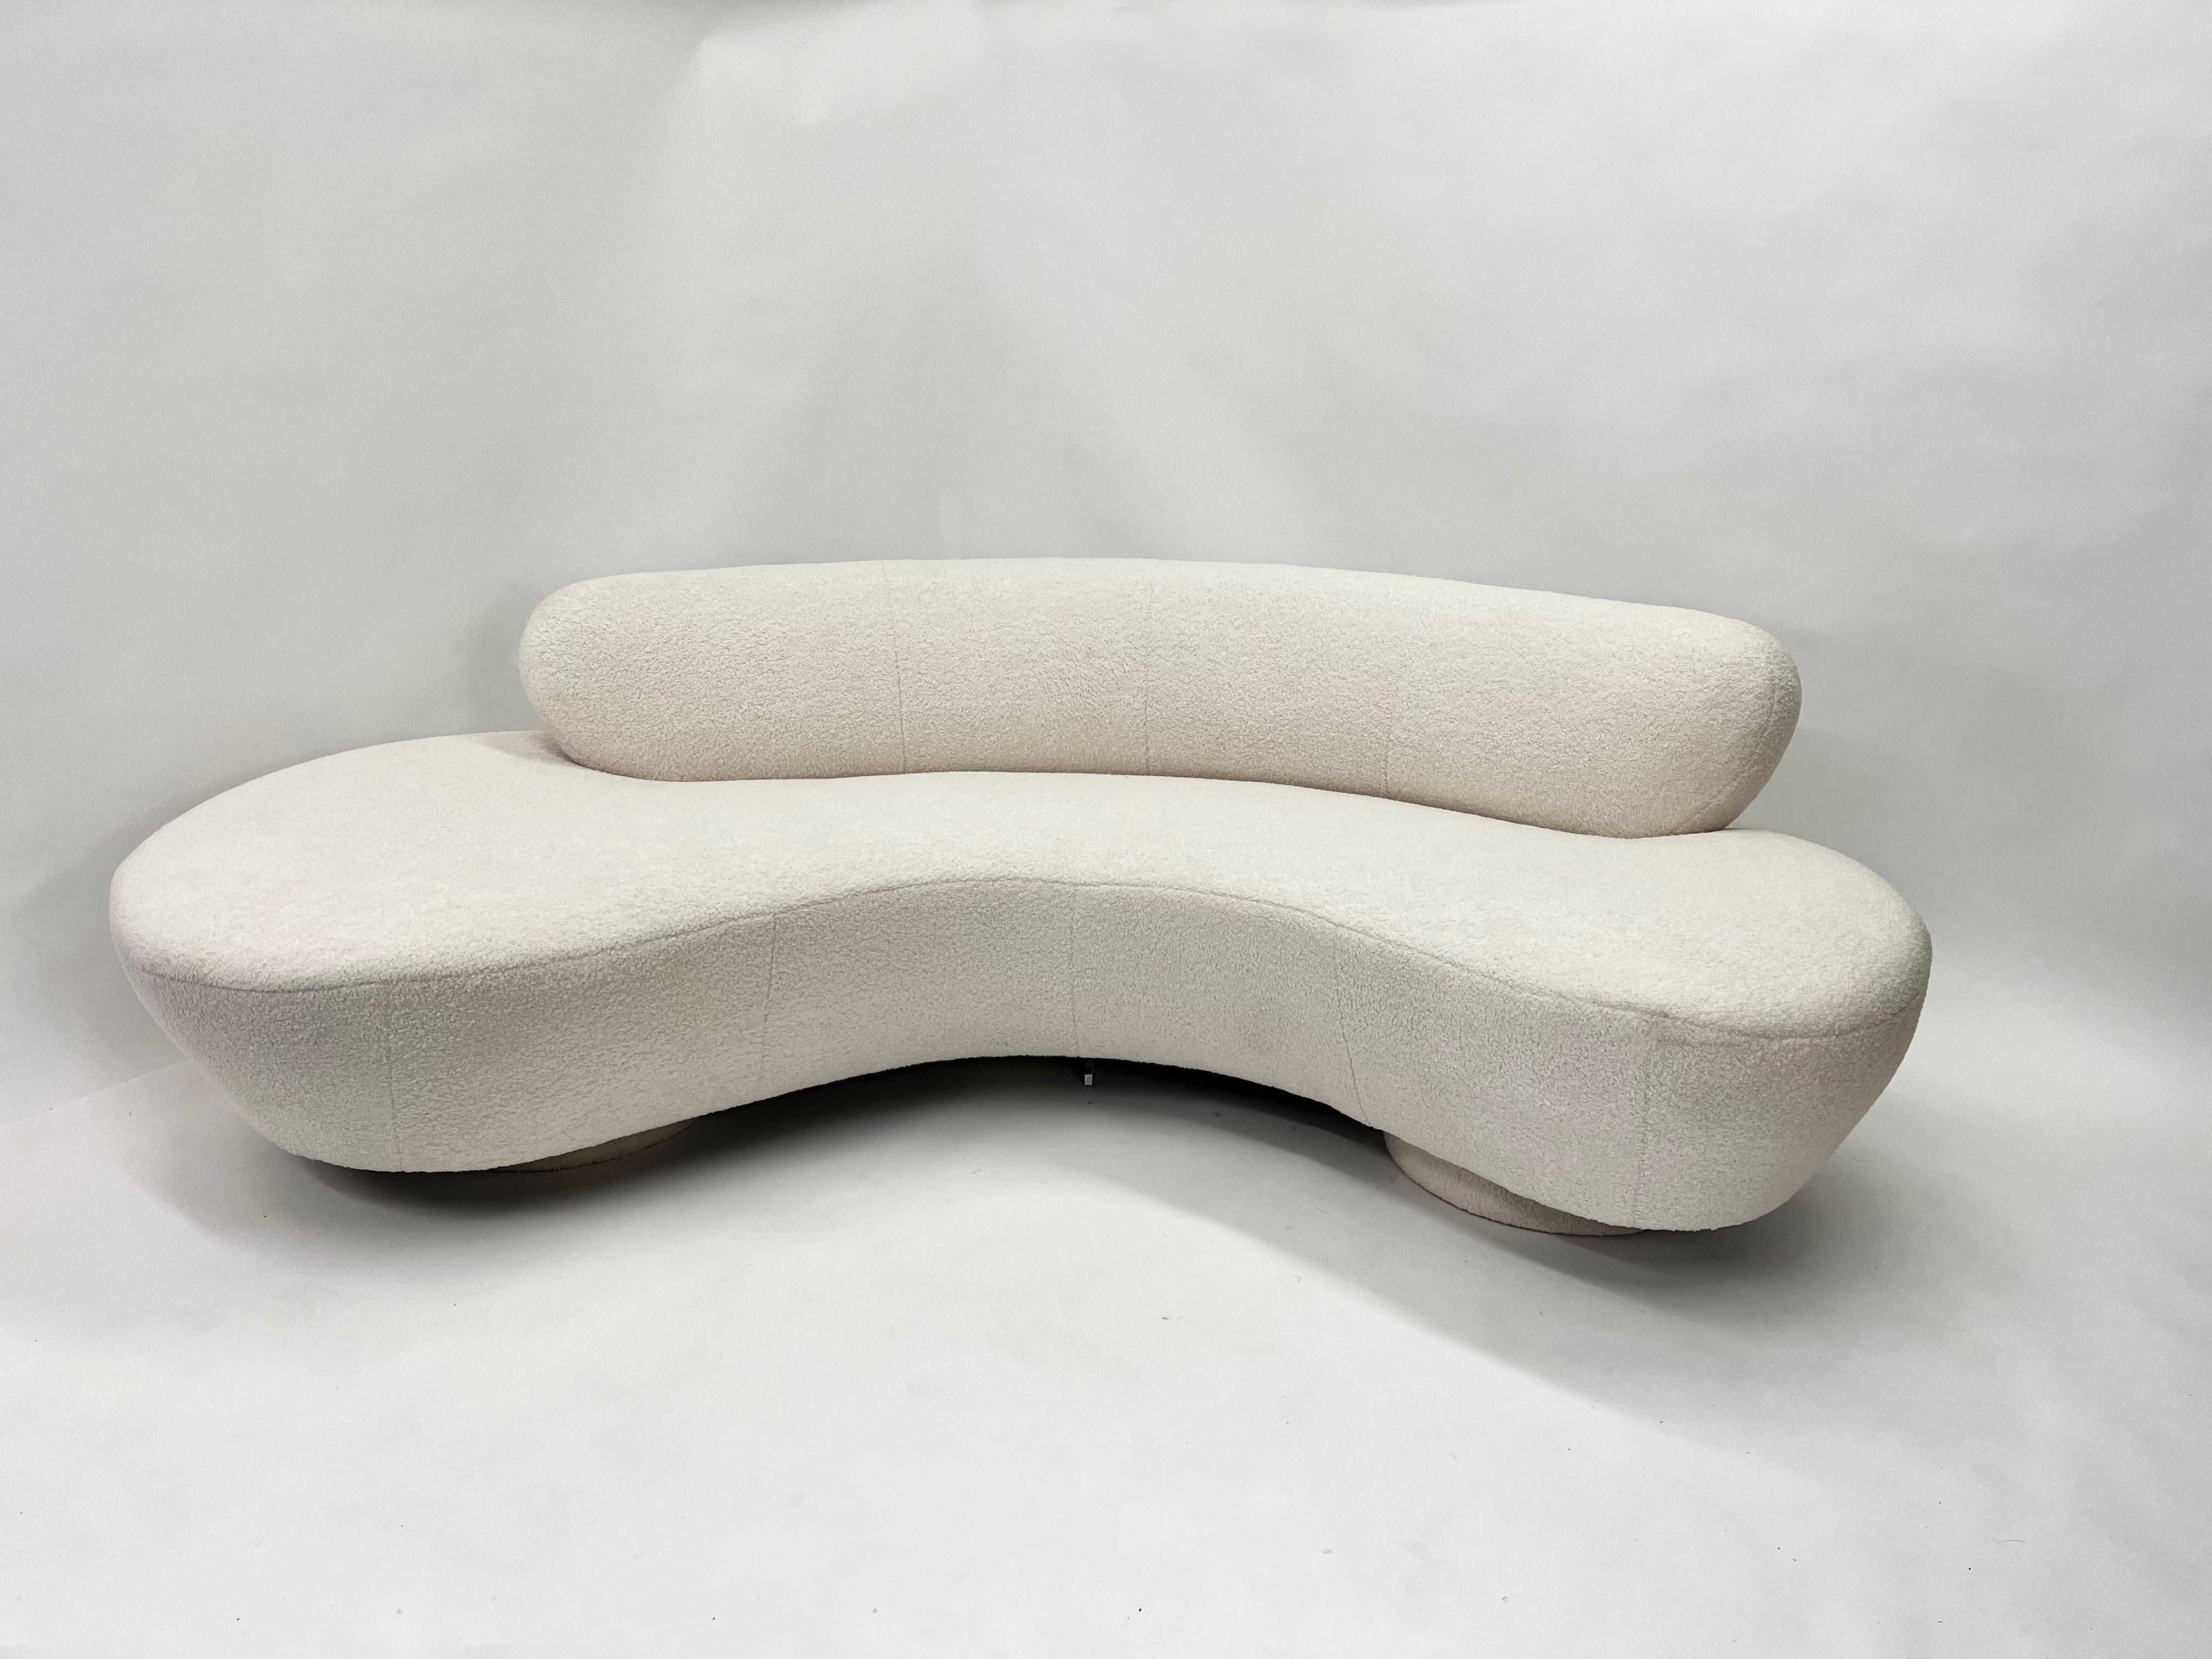 This is a stunning and iconic Serpentine Cloud sofa designed by the late Vladimir Kagan for Directional, circa 1970s. The sofa features Kagan's signature Serpentine design, with sensuous curves that are both elegant and functional.
Kagan, inspired